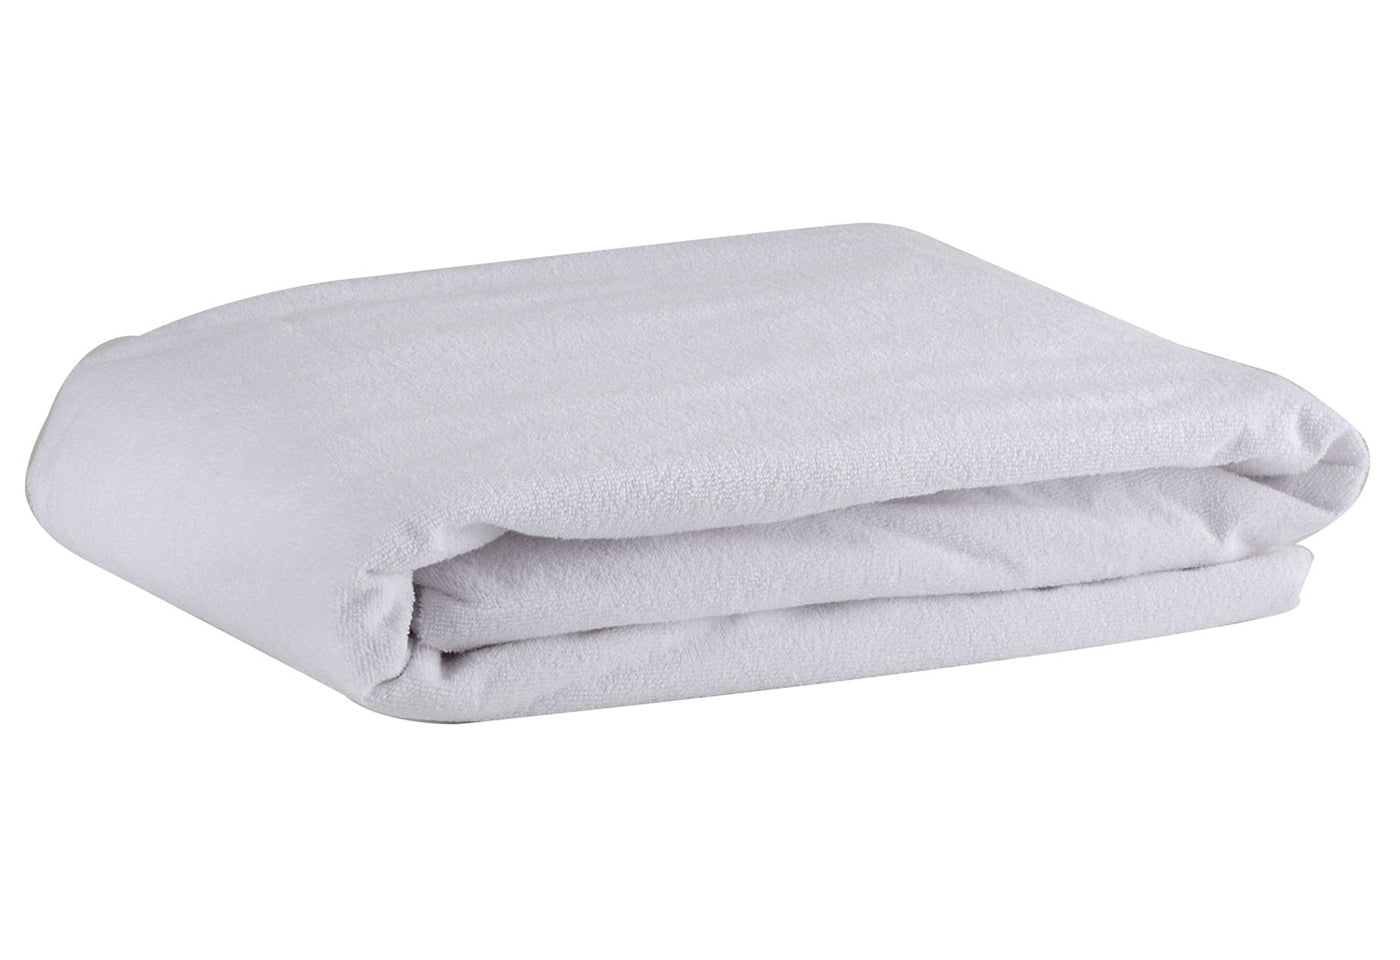 Mattress Protector Towelling - Brolly Sheets NZ